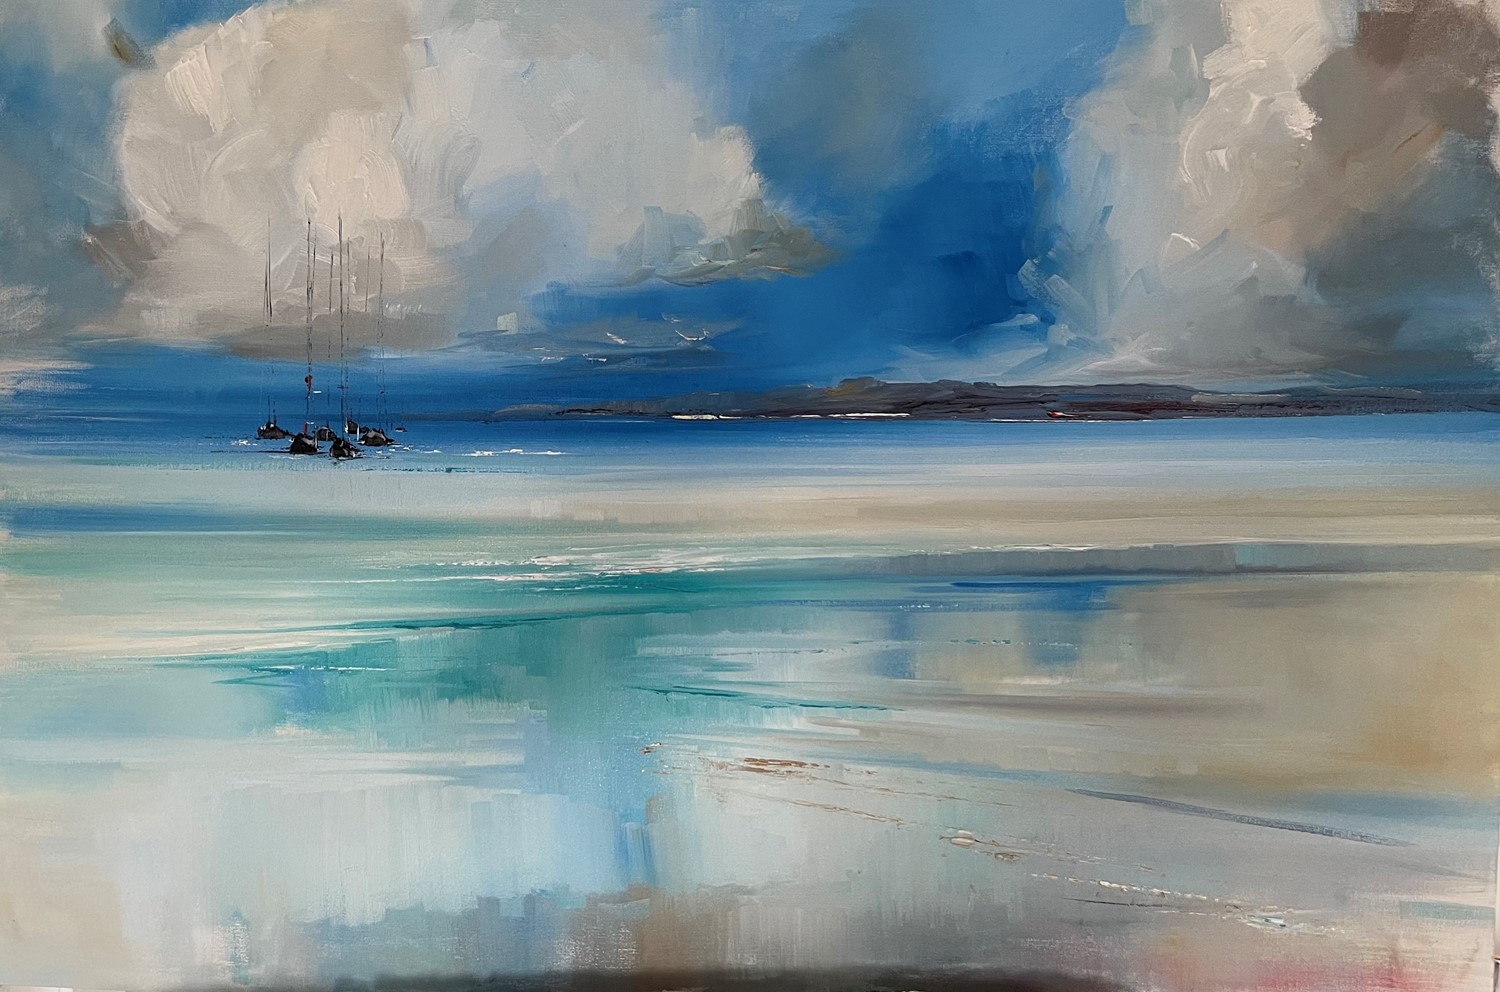 'Tidal pools and Yachts' by artist Rosanne Barr